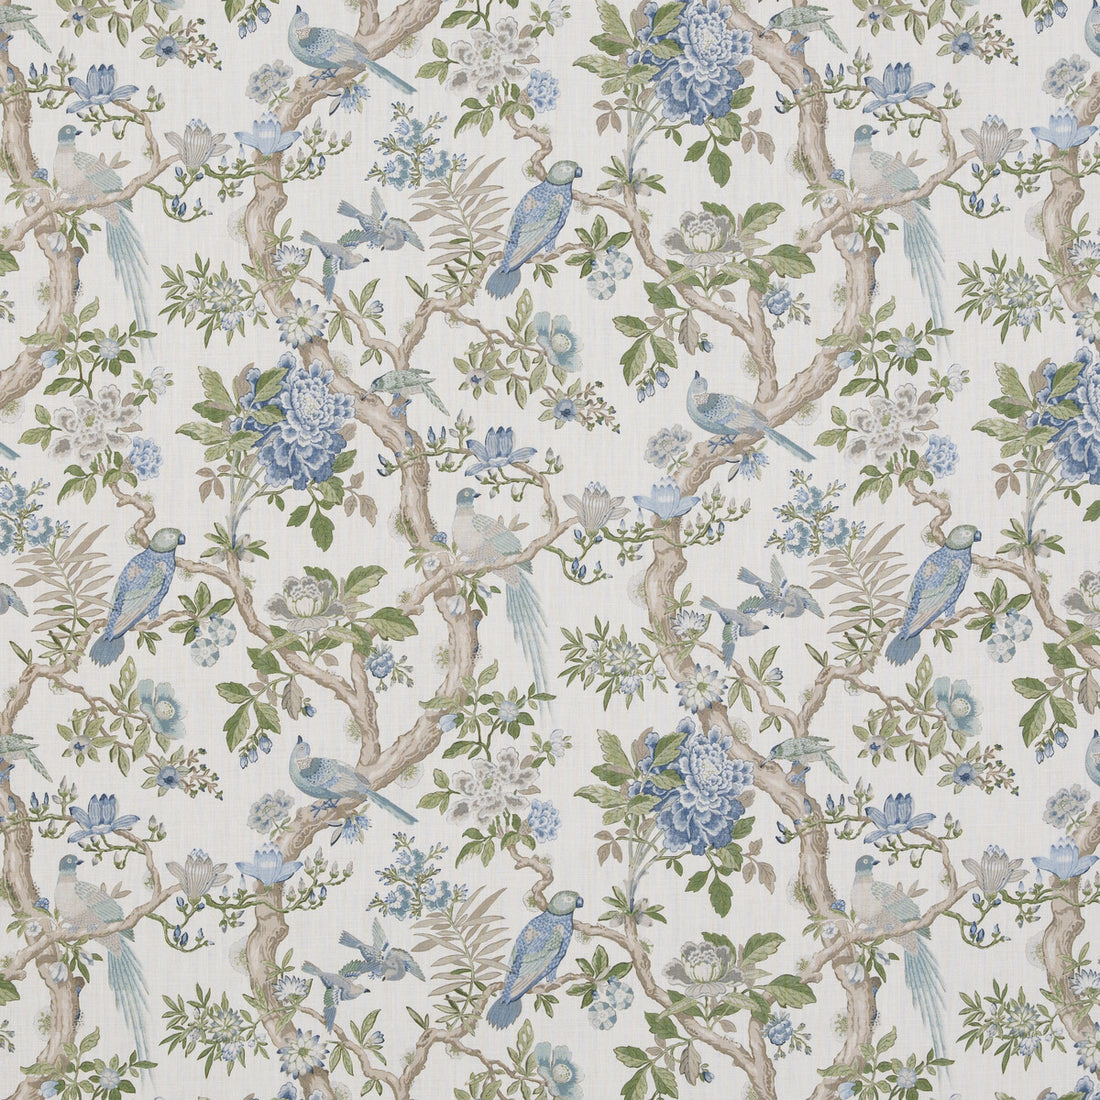 Eltham fabric in blue color - pattern BP10948.1.0 - by G P &amp; J Baker in the Ashmore collection